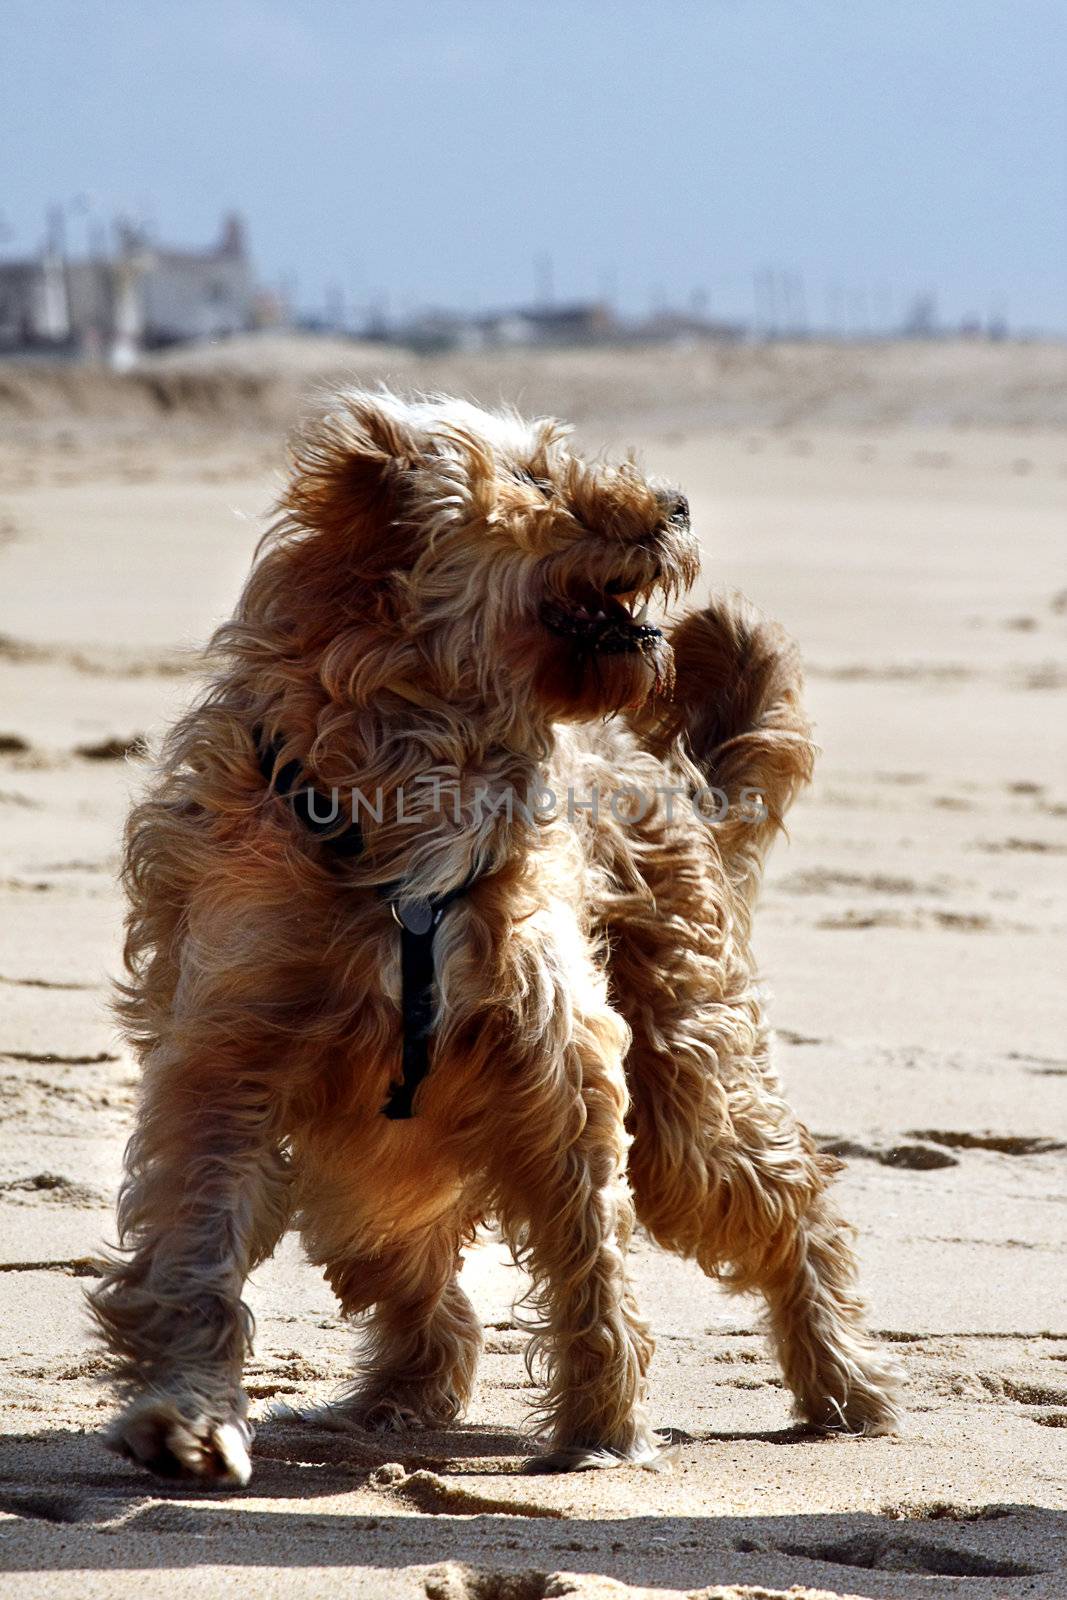 View of a domestic dog with long fur playing on the beach.